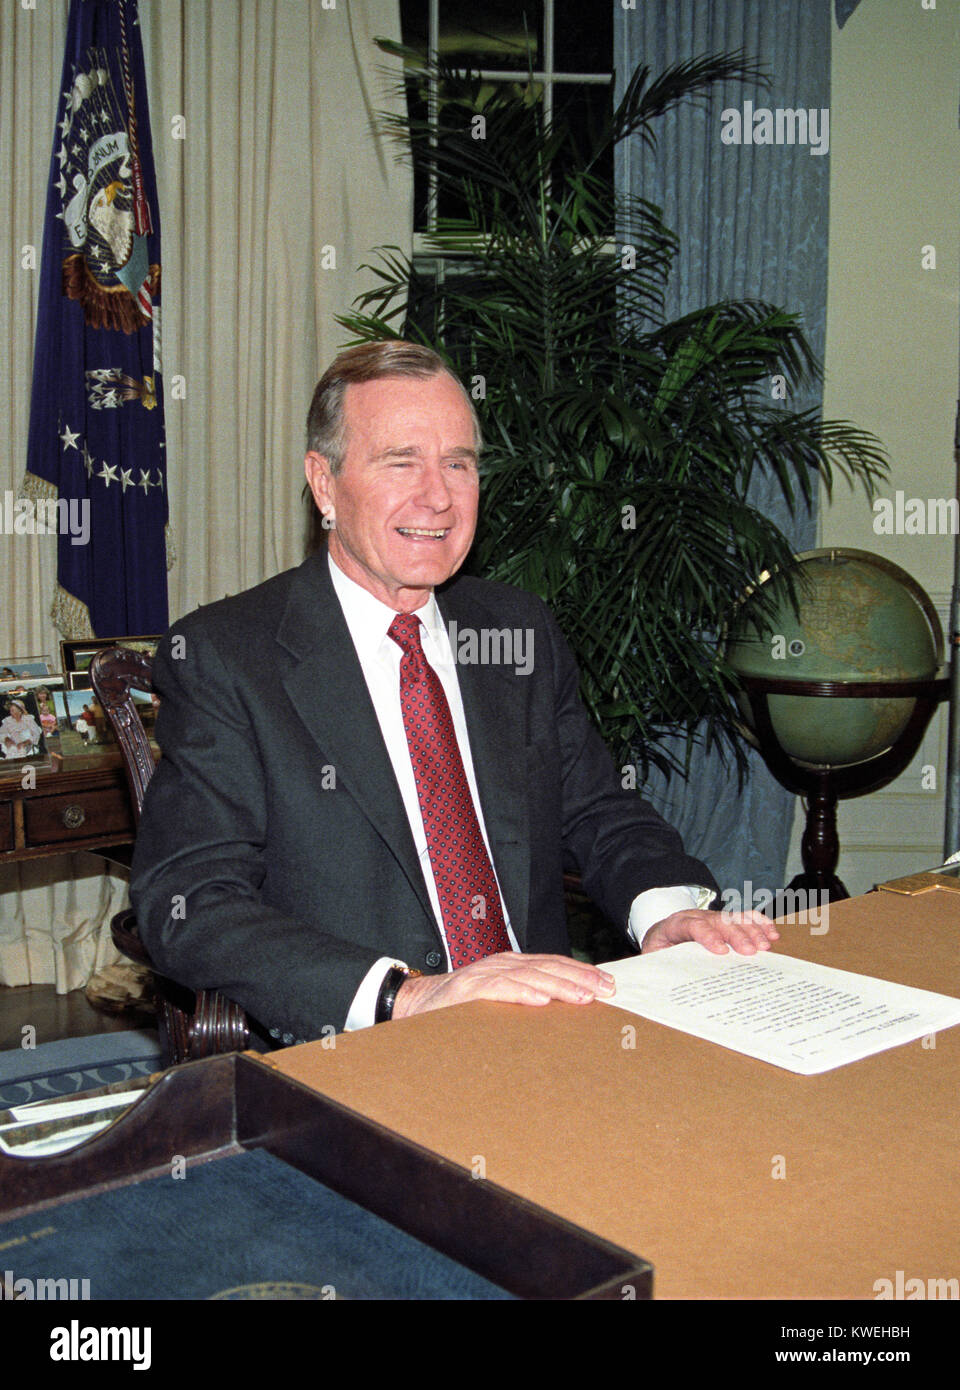 United States President George H.W. Bush poses for photographers after delivering an address to the nation from the Oval Office of the White House in Washington, DC on Christmas Day, December 25, 1991 announcing the resignation of President Mikhail Gorbachev as President of the Union of Soviet Socialist Republics, marking the collapse of the Soviet Union and the end of the Cold War.  Credit: Arnie Sachs  / CNP /MediaPunch Stock Photo